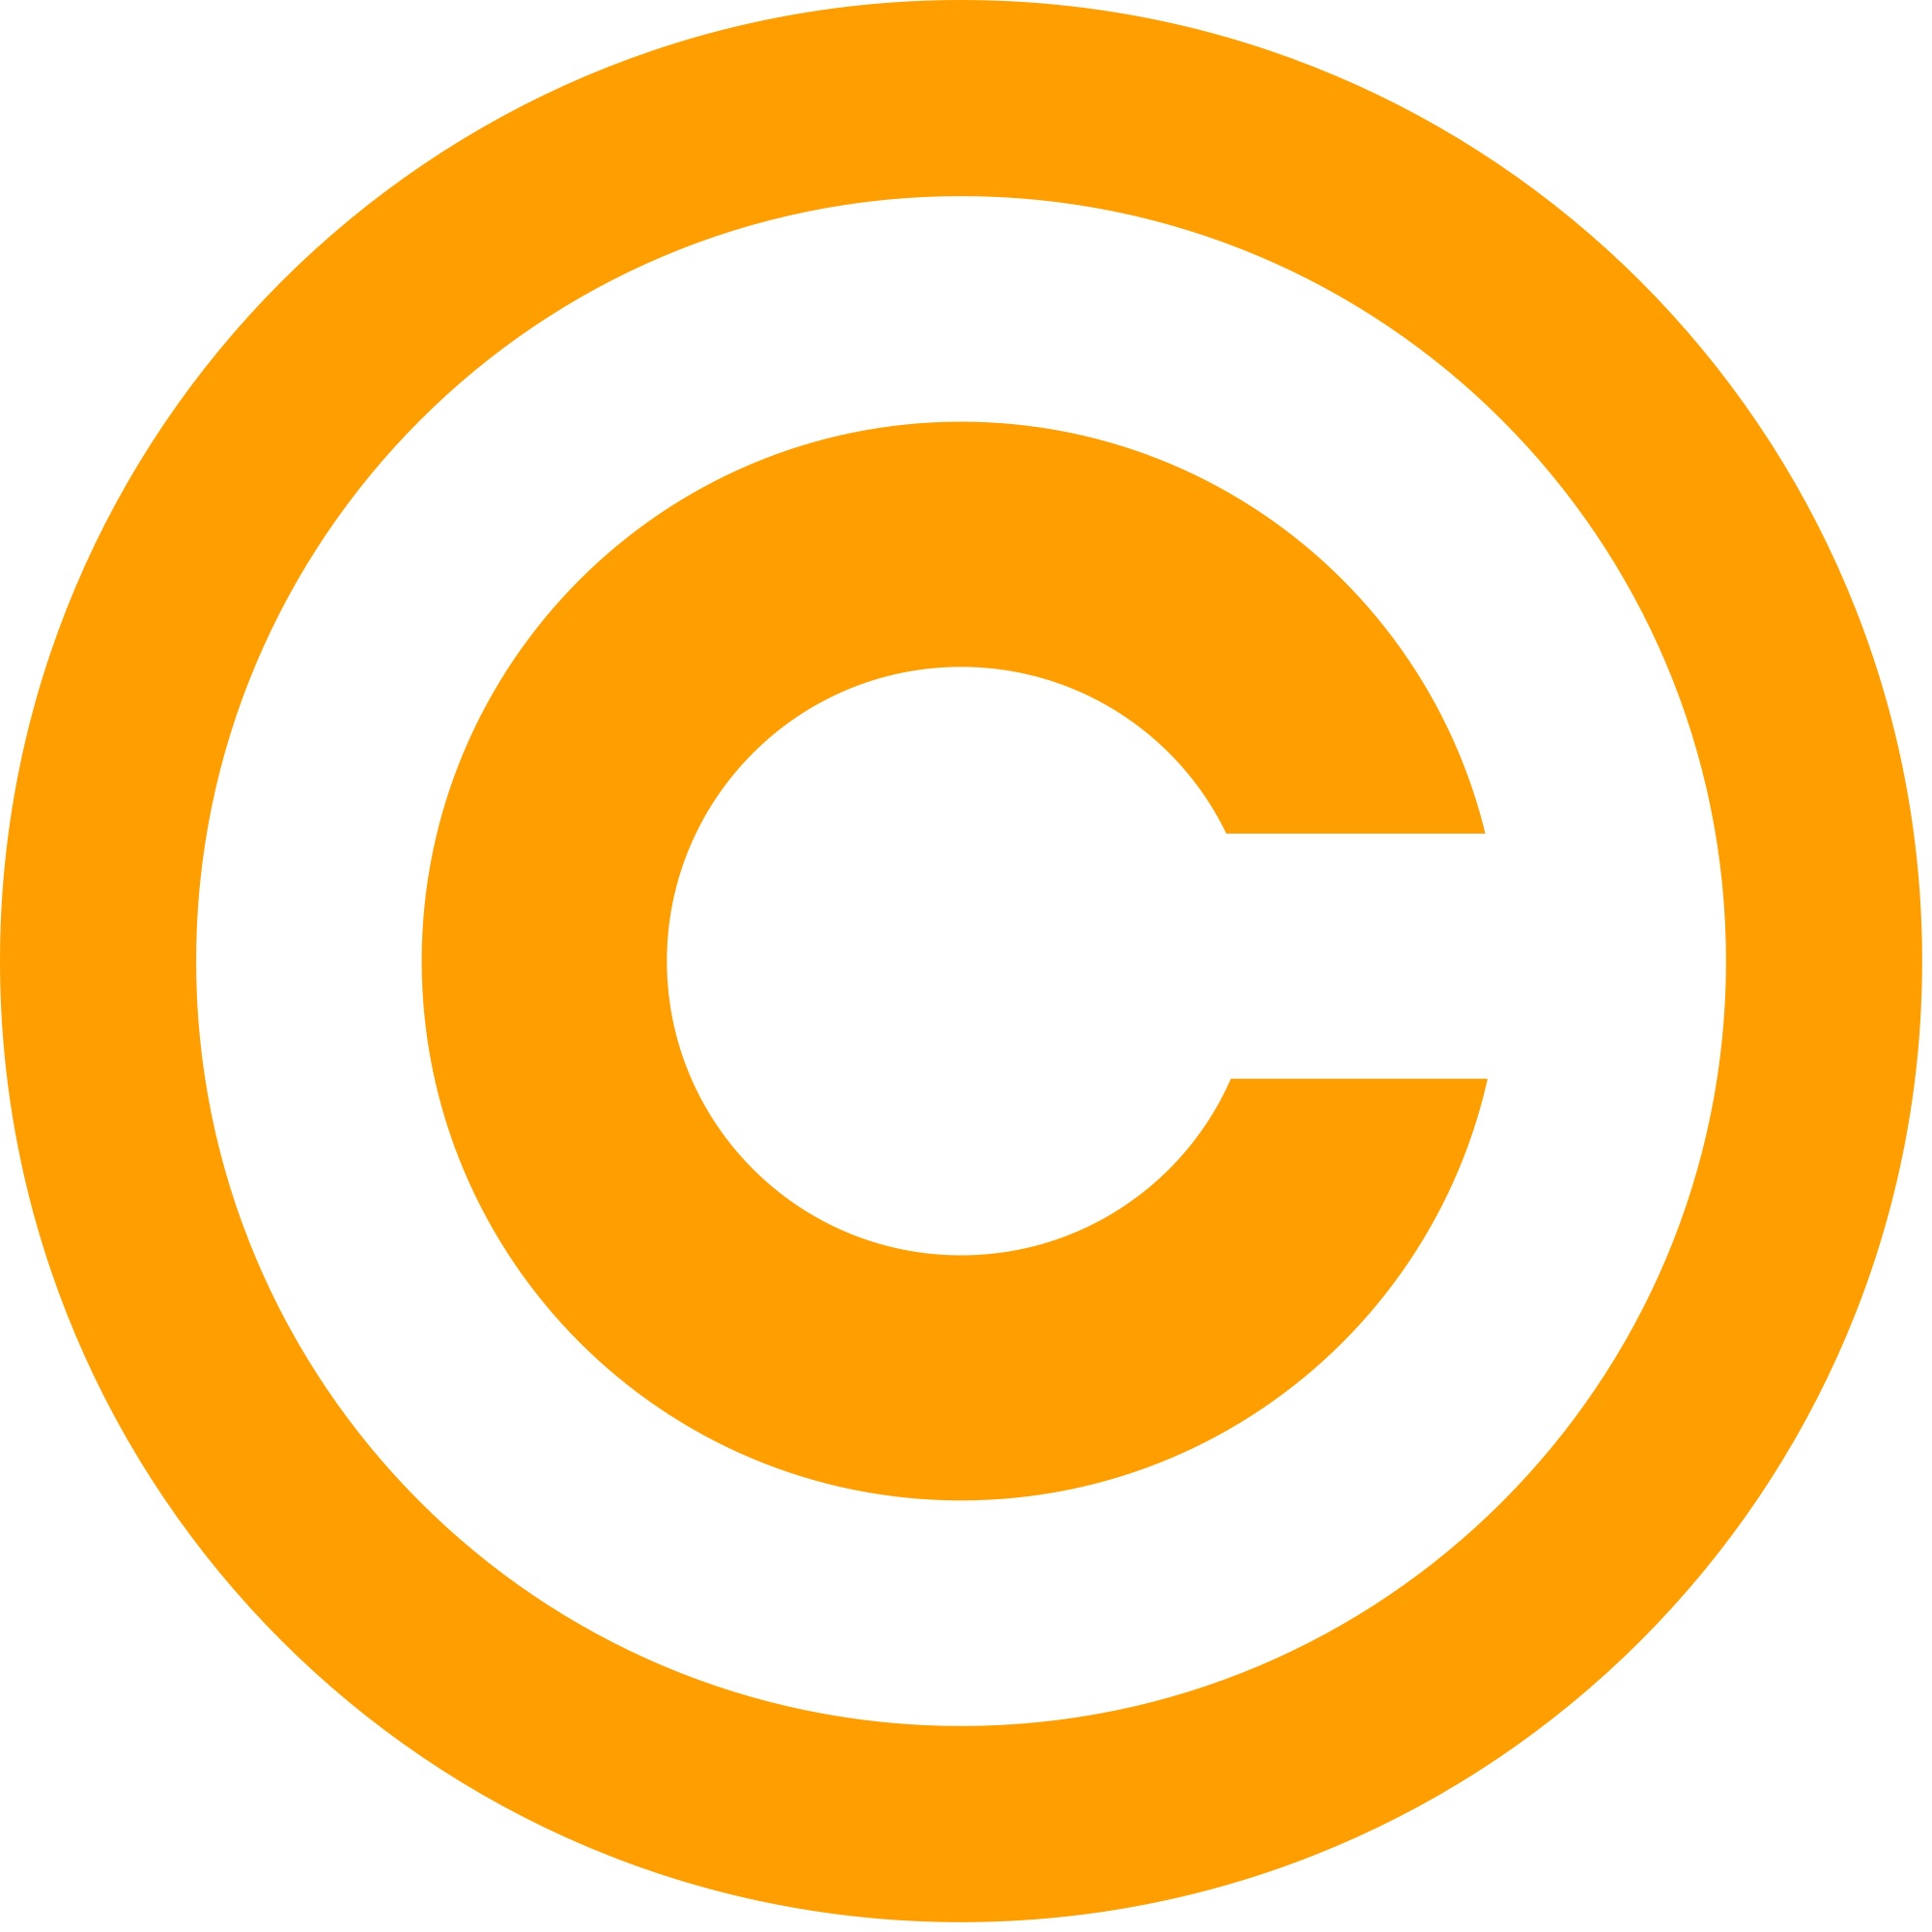 Copyright Laws in Islam